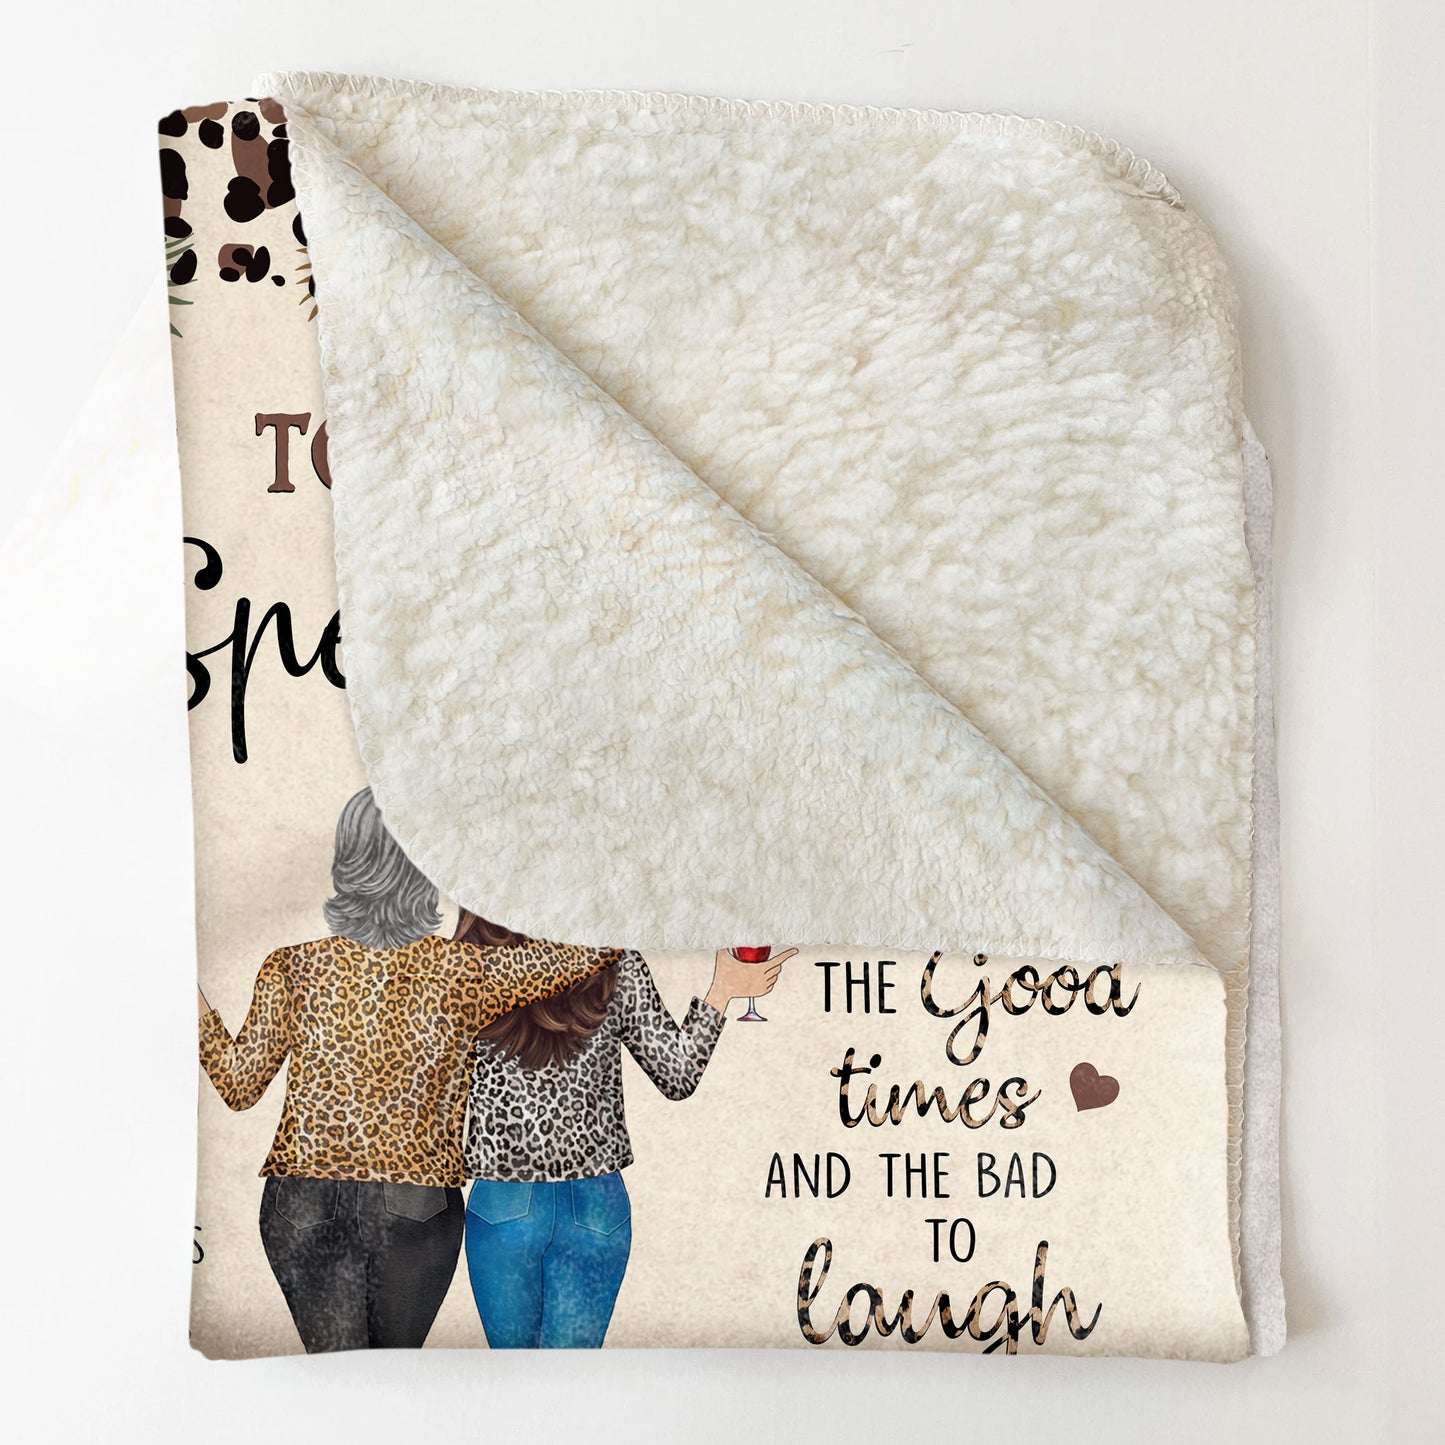 To My Special Aunt You'll Be There For Me - Personalized Blanket